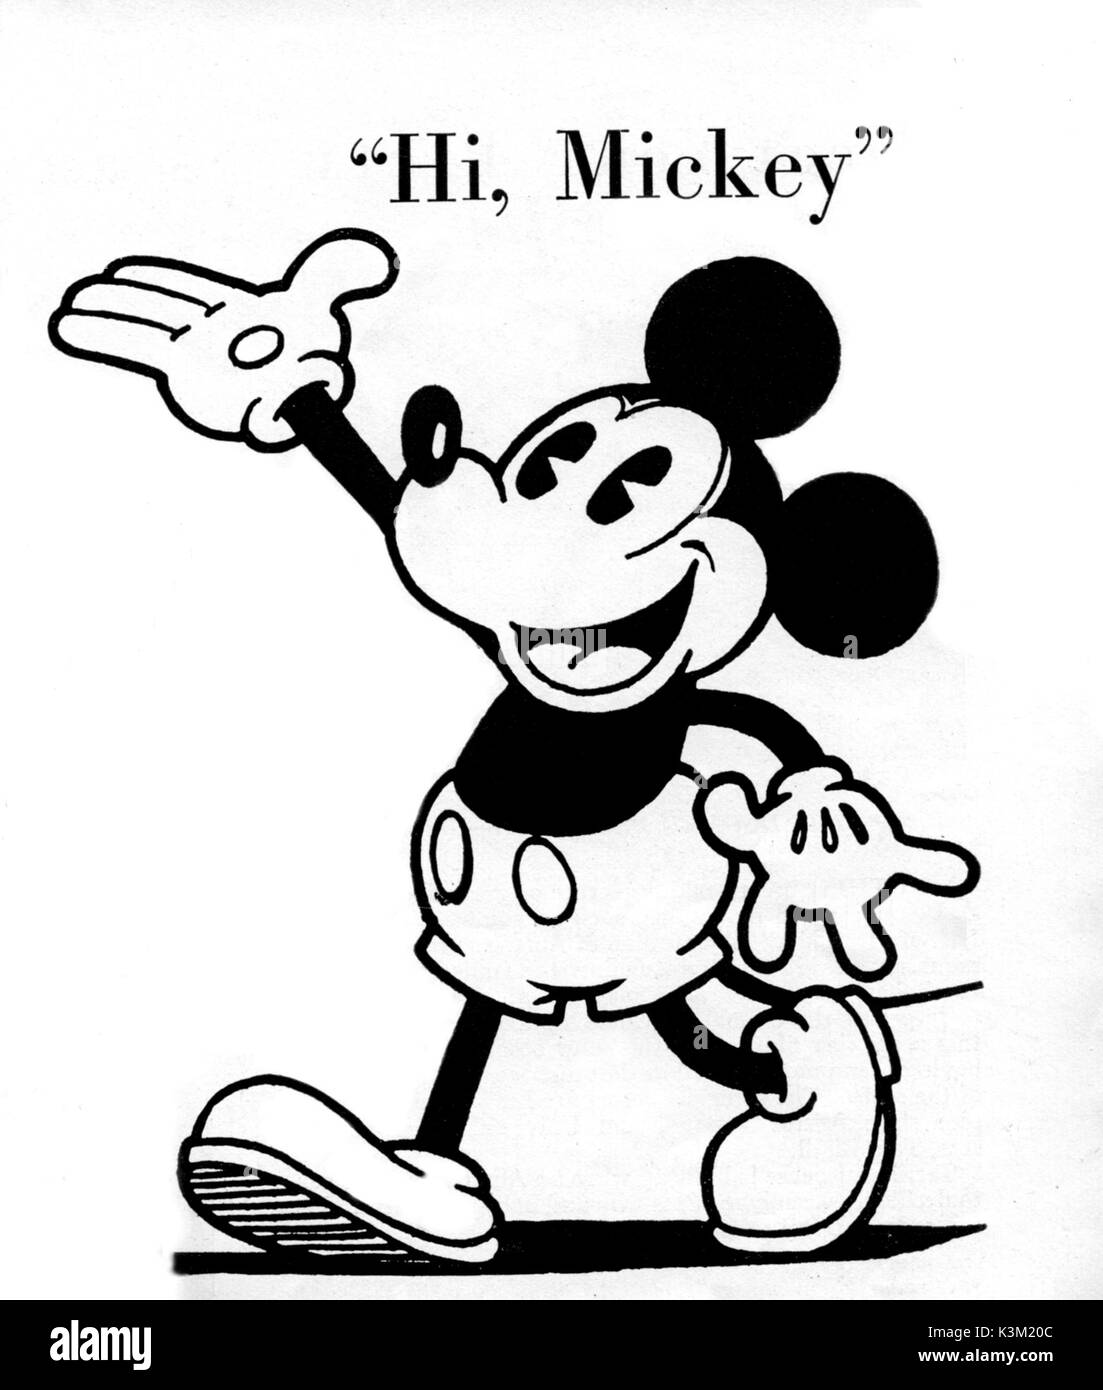 codelion/public-domain-mickey-mouse · Hugging Face